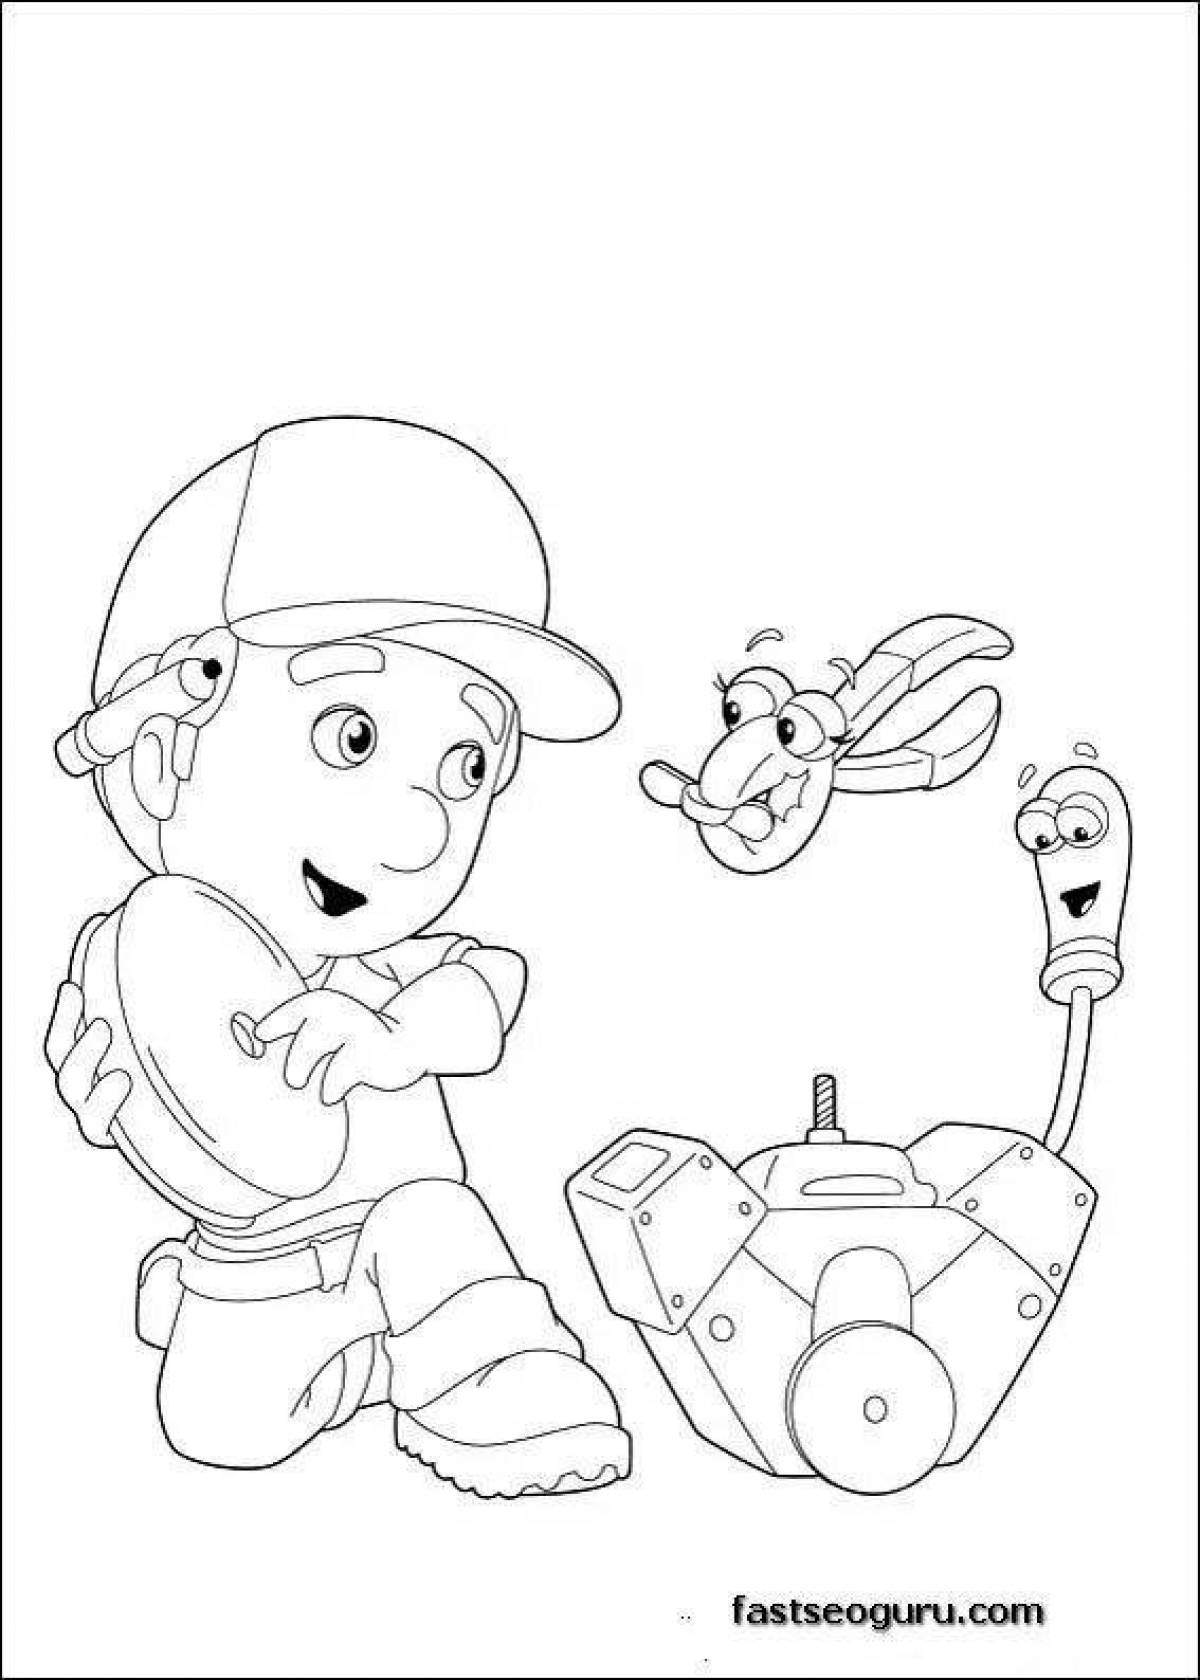 Colorful cog coloring page